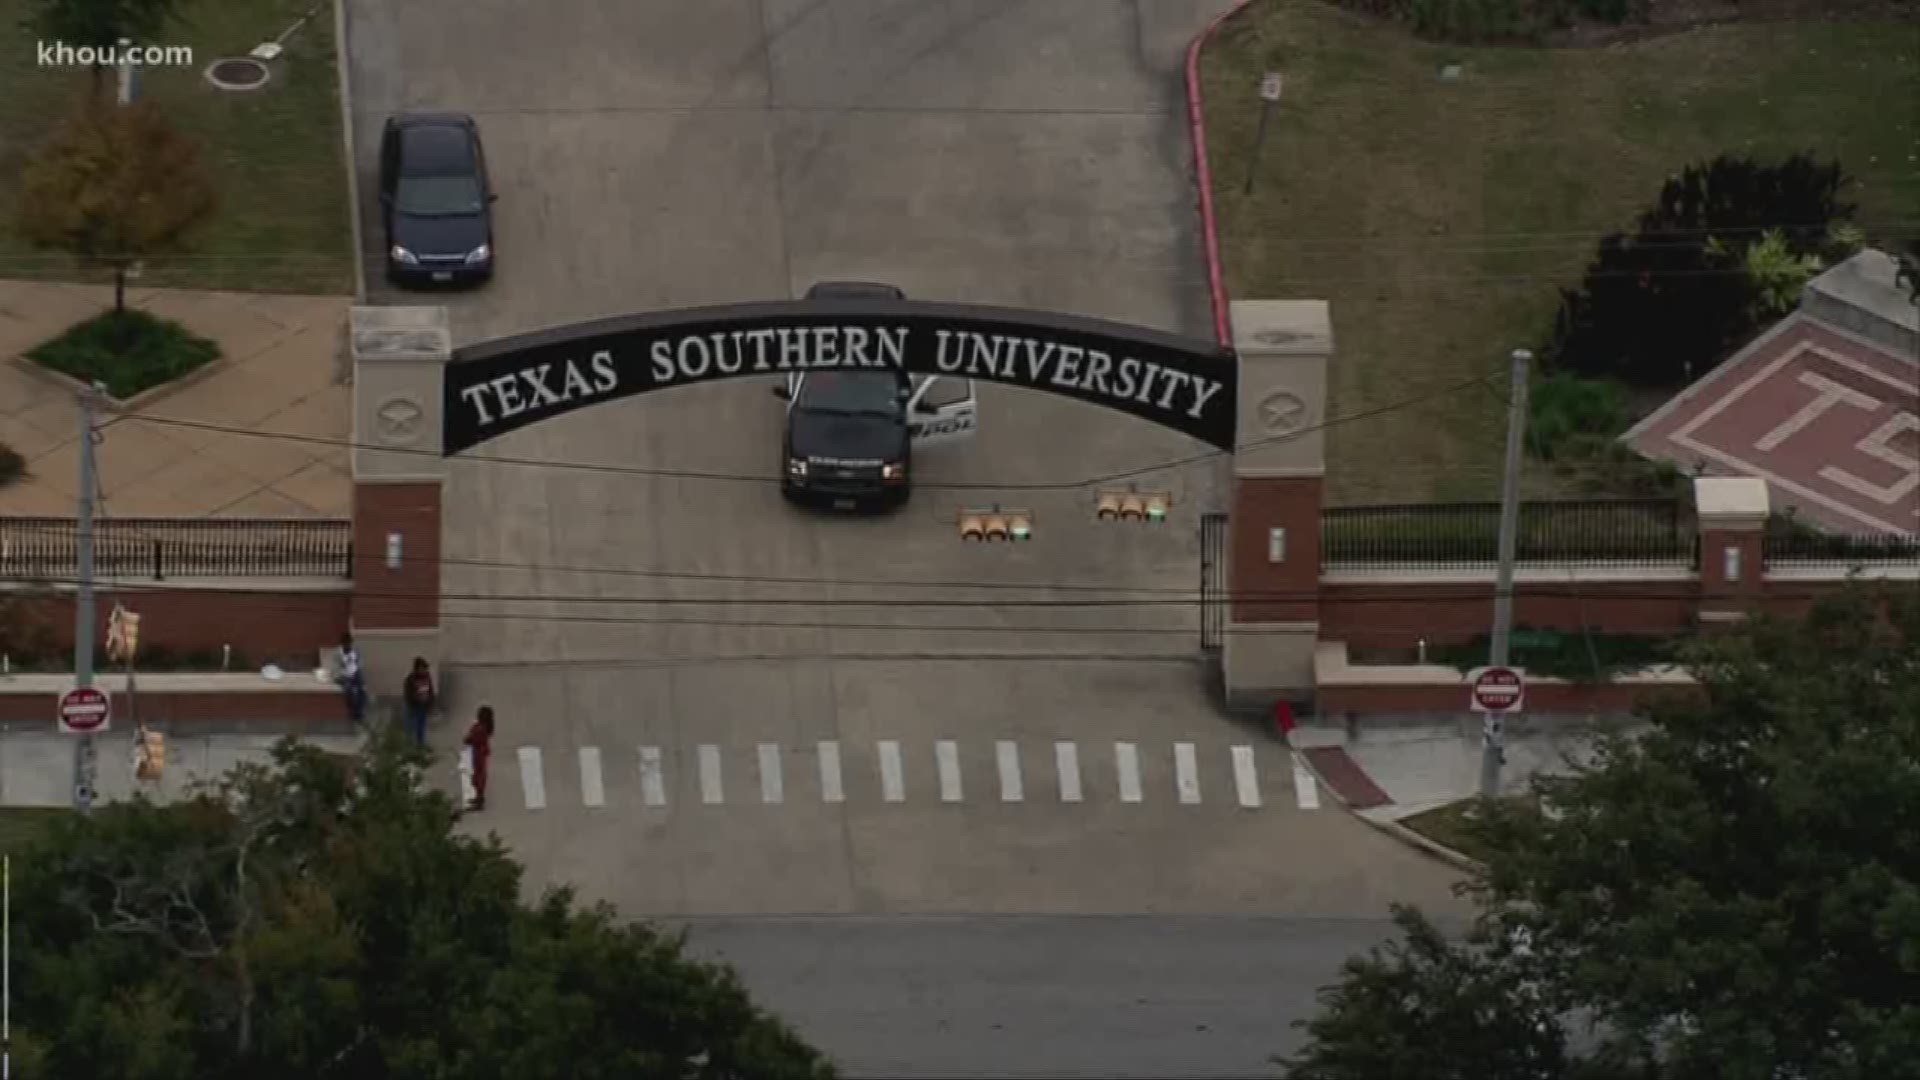 All students, faculty, and staff at Texas Southern University are being told to evacuate campus, including all dorms, due to a bomb threat, Houston Police say.